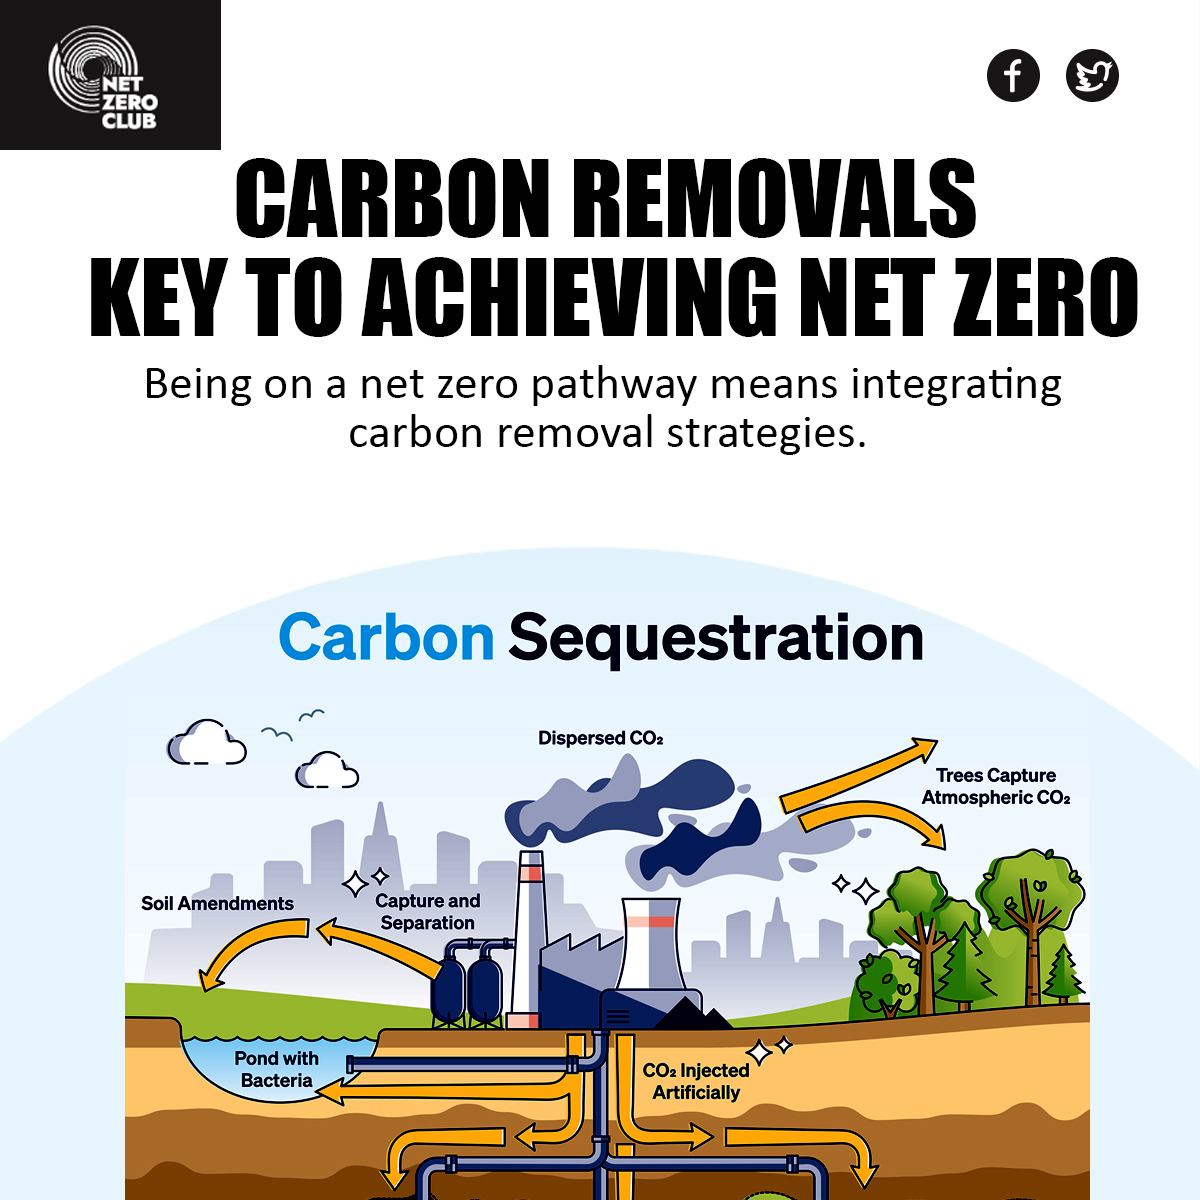 We had the privilege of speaking with Simon Manley, the Head of Carbon at UNDO, a pioneering carbon removal company, as part of our exclusive Big Zero Briefing. Visit net-zeroclub.co.uk to learn more. 
#carbonremoval #netzero #climateaction  #carbonoffsetting